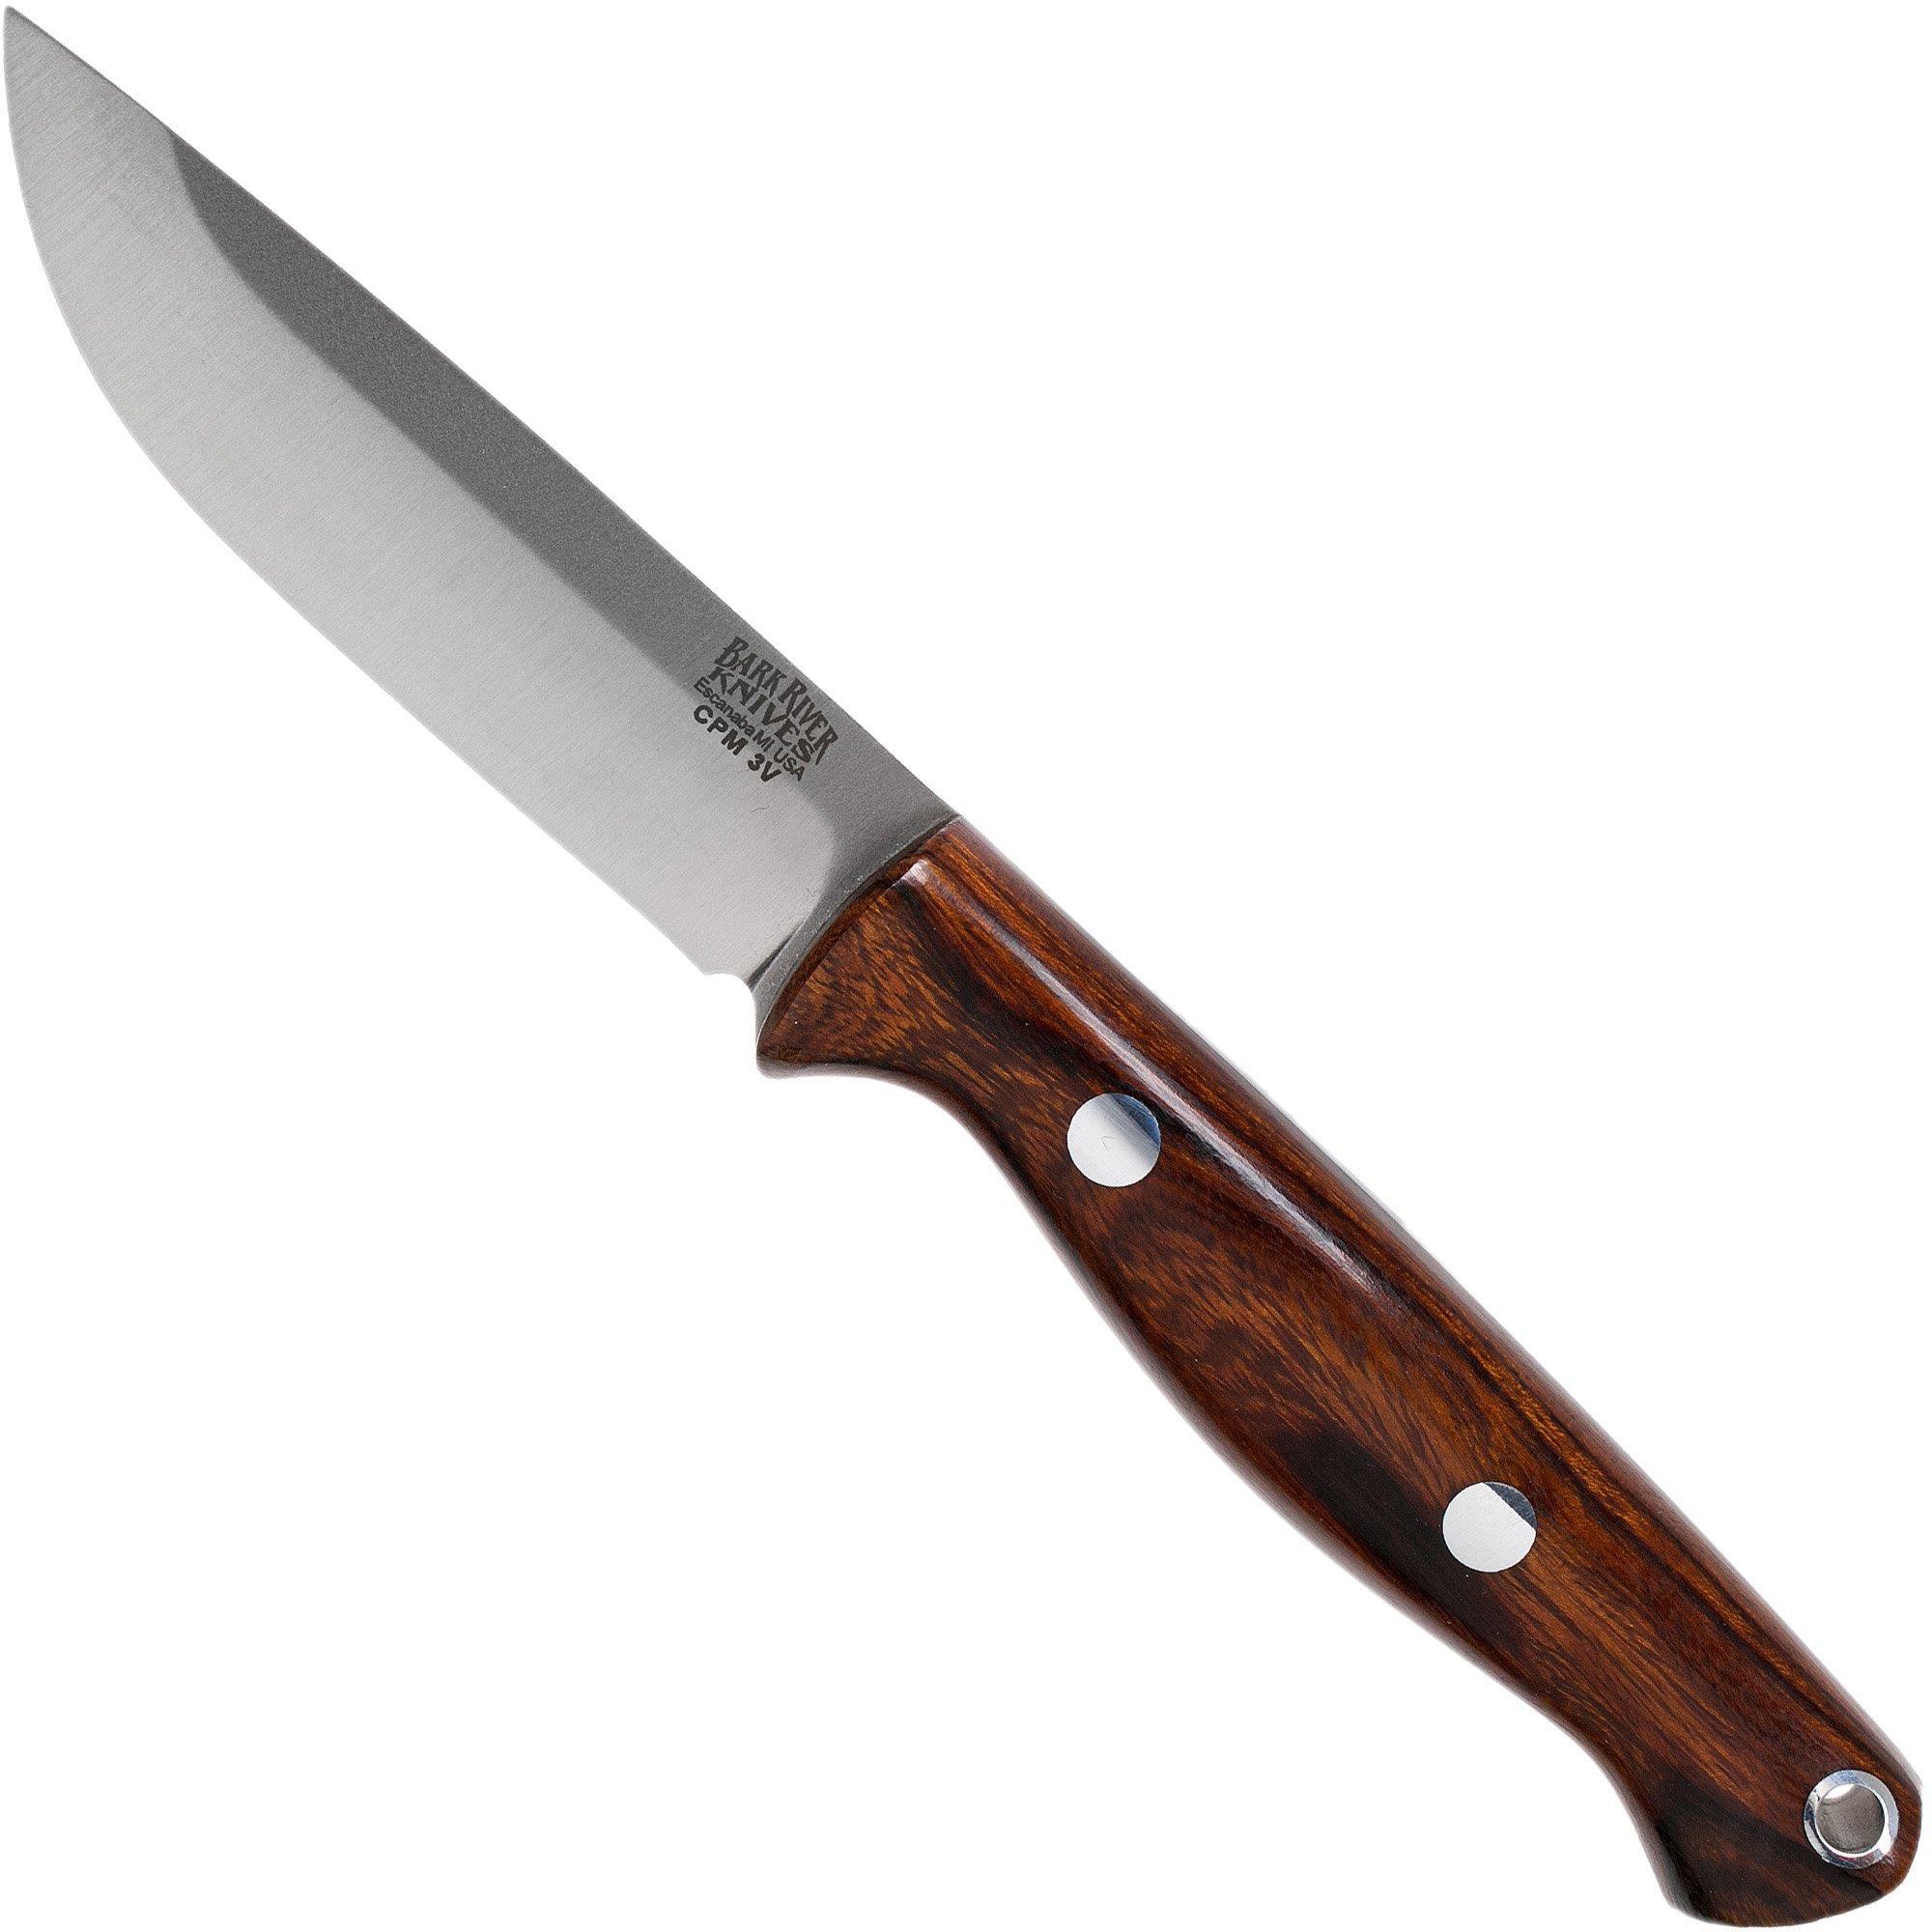 Bark River Bravo | All knives tested and in stock!